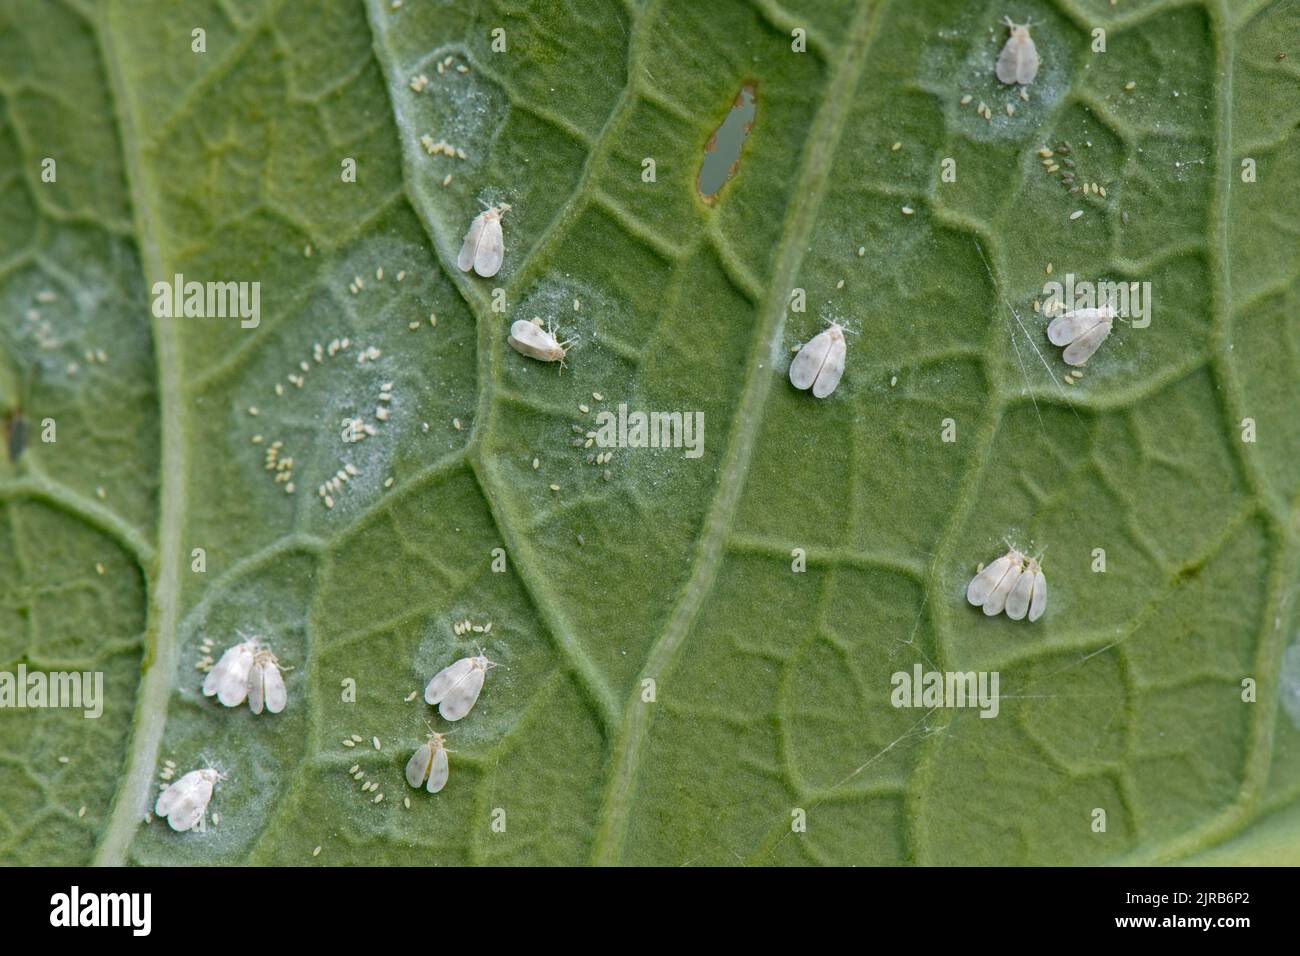 Cabbage whitefly (Aleyrodes proletella) adults and circles of eggs on the underside of purple sprouting broccoli leaf, Berkshire, August Stock Photo